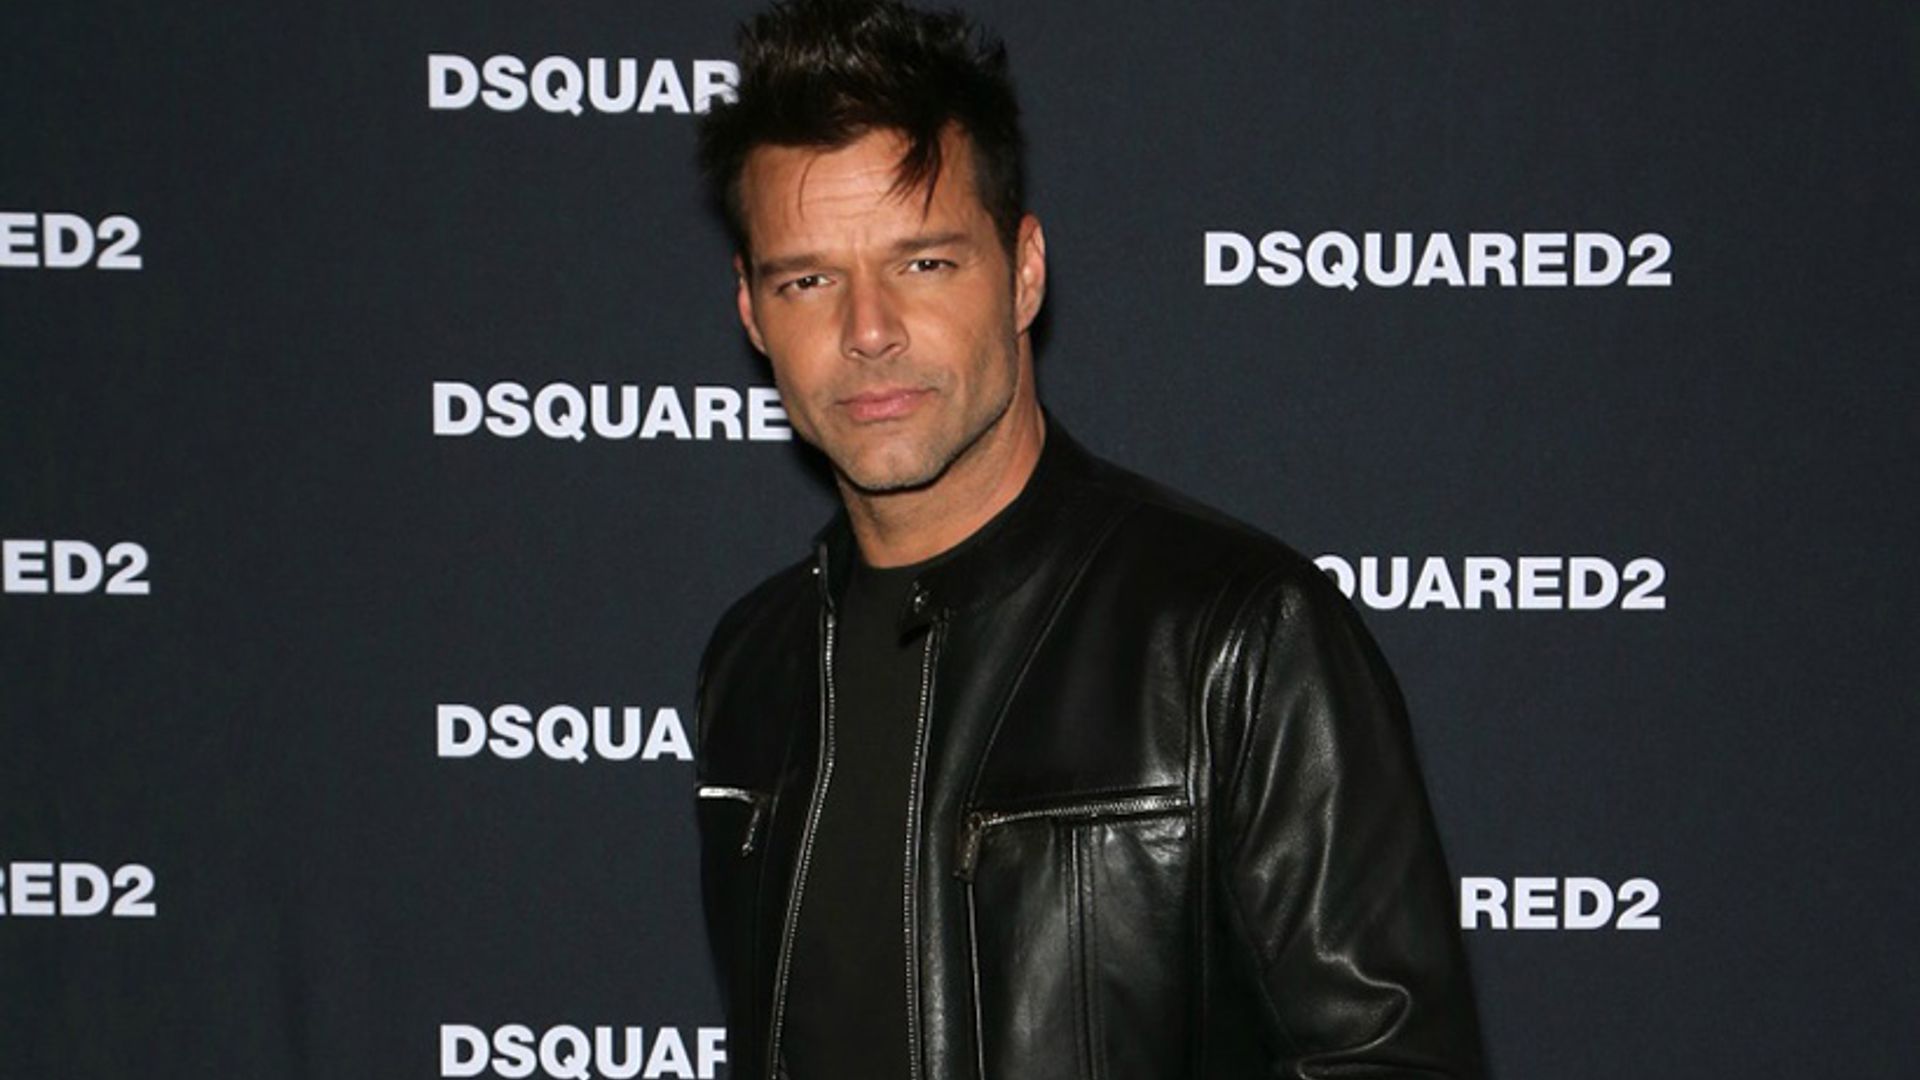 Ricky Martin will play Gianni Versace's lover on American Crime Story